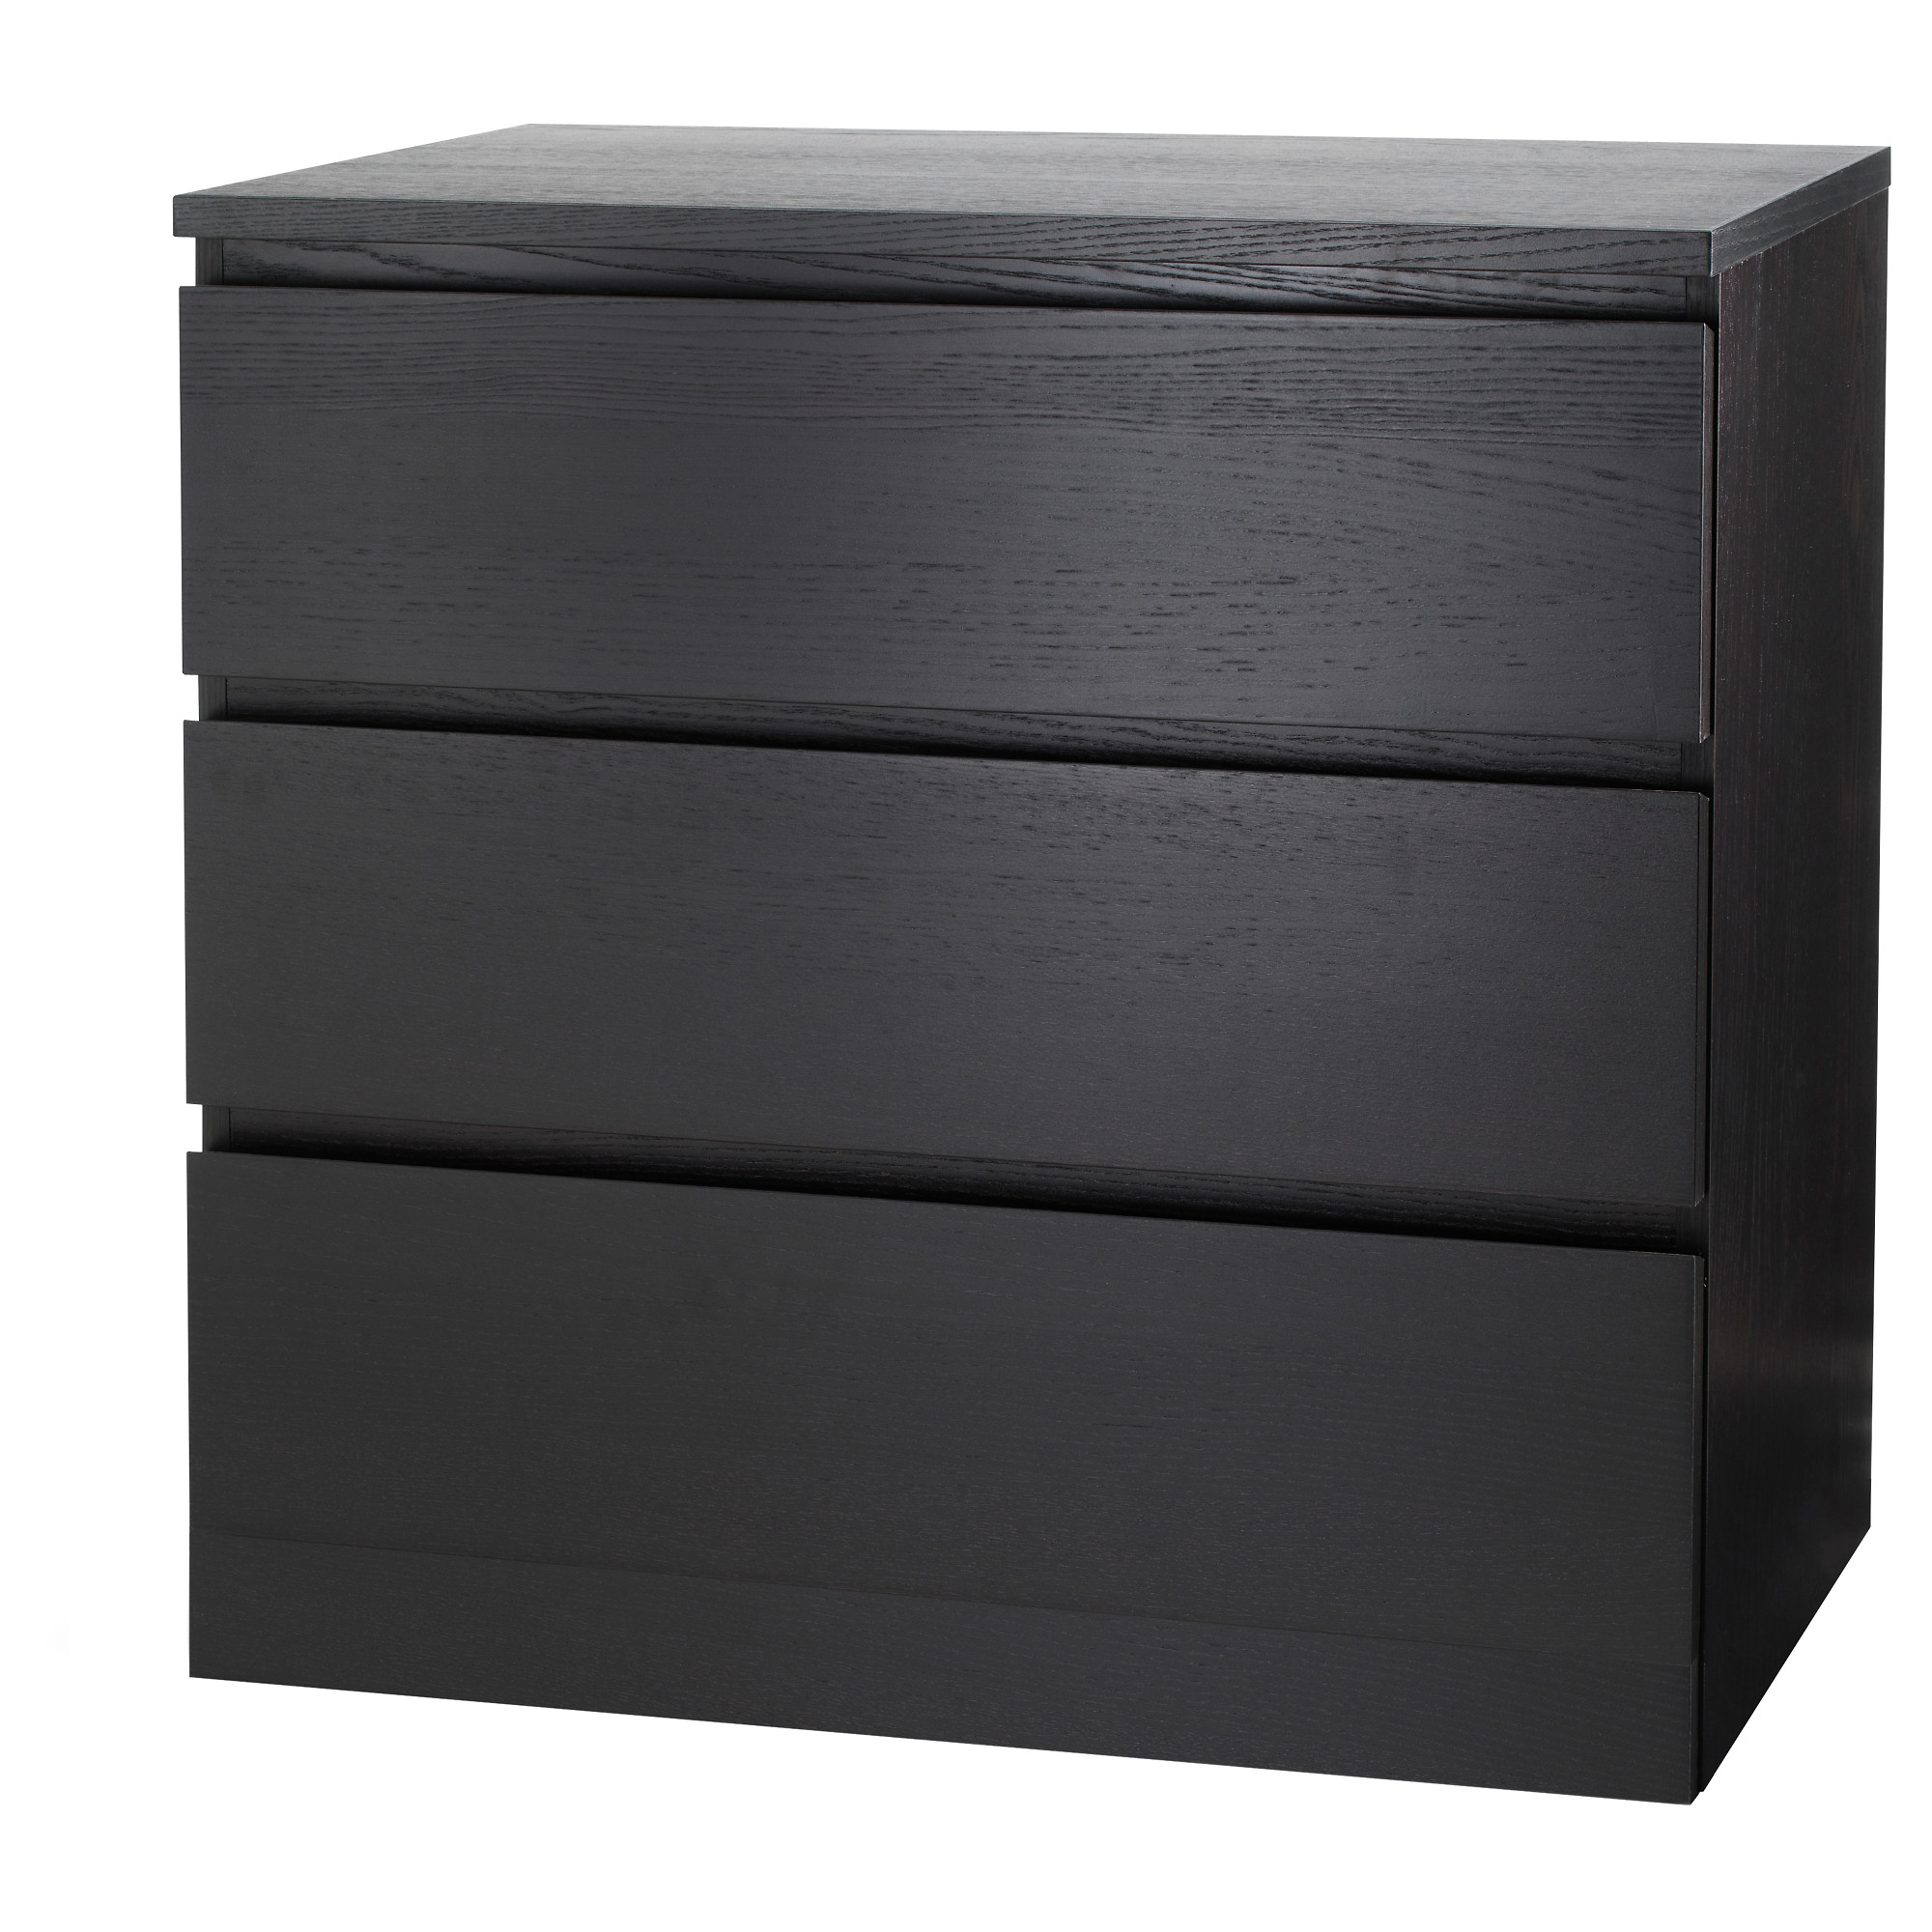 30354622 Malm Chests of Drawers IKEA khmer in phnom penh cambodia